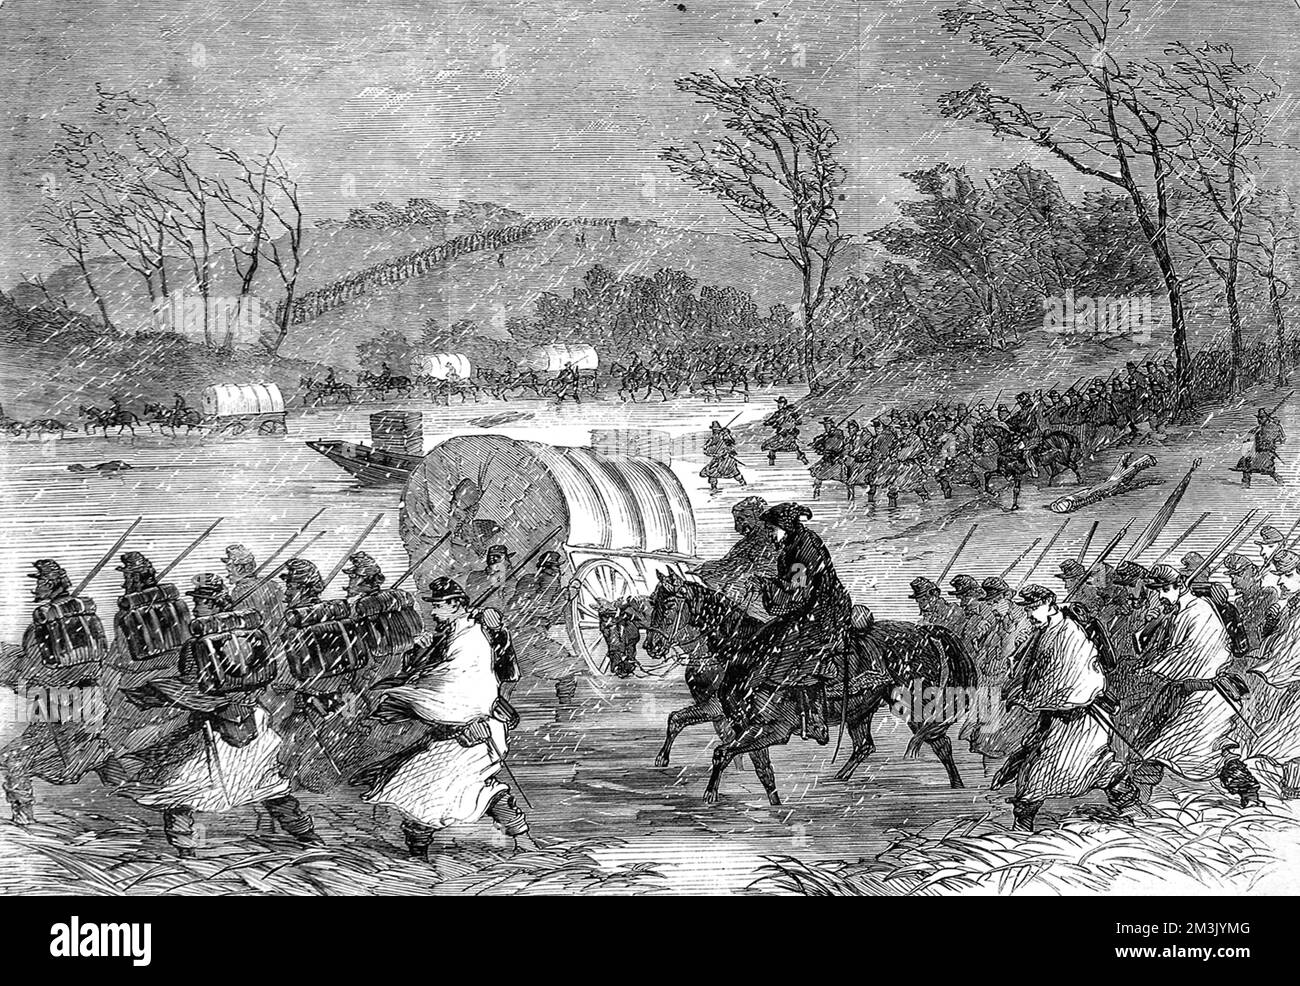 Unsuccessful attempt of the Army of the Potomac to cross the Rappahannock on the 20th January 1863.  The Unionists are seen here crossing the Rappahannock river with difficulty in blizzard conditions. It took them months and a 6 week siege to take Vickburg from the Confederates.     Date: 1863 Stock Photo